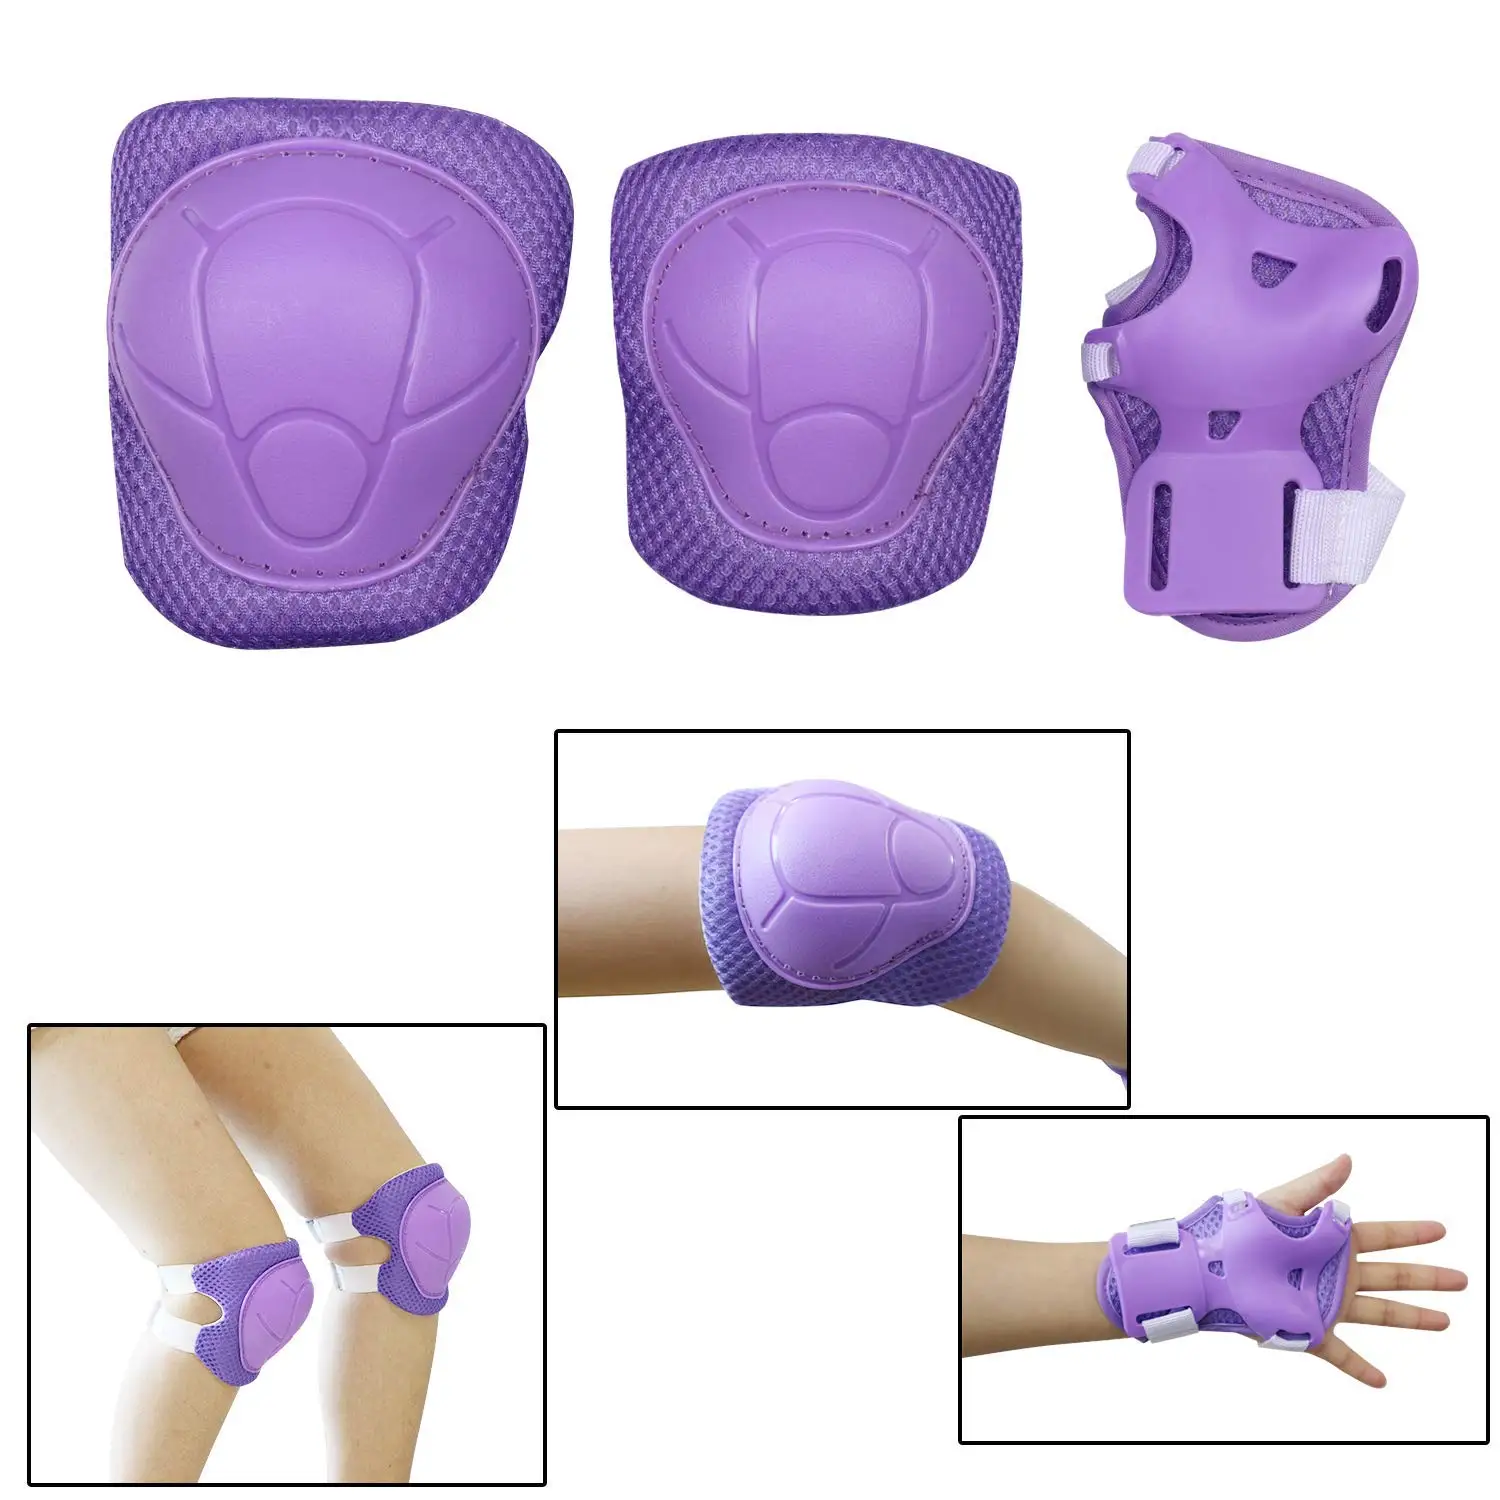 Knee Support For Kids Knee And Elbow Support With Wrist Guards For ...